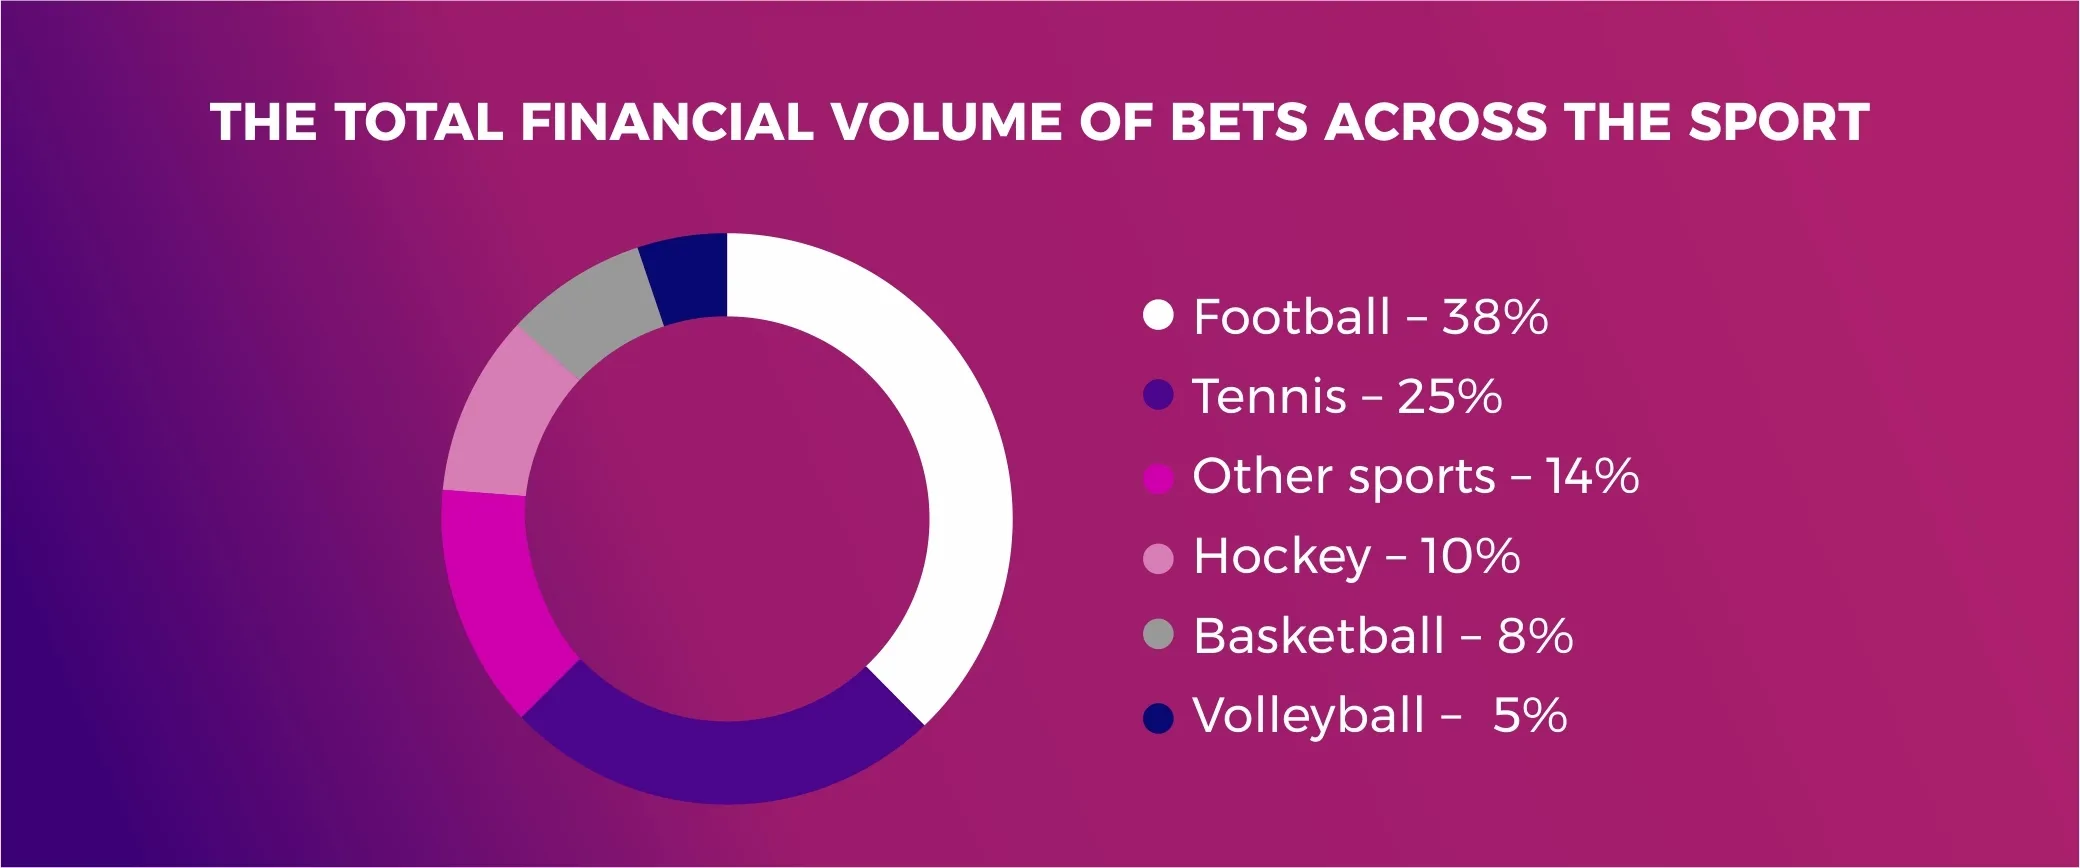 The total financial volume of bets across the sport